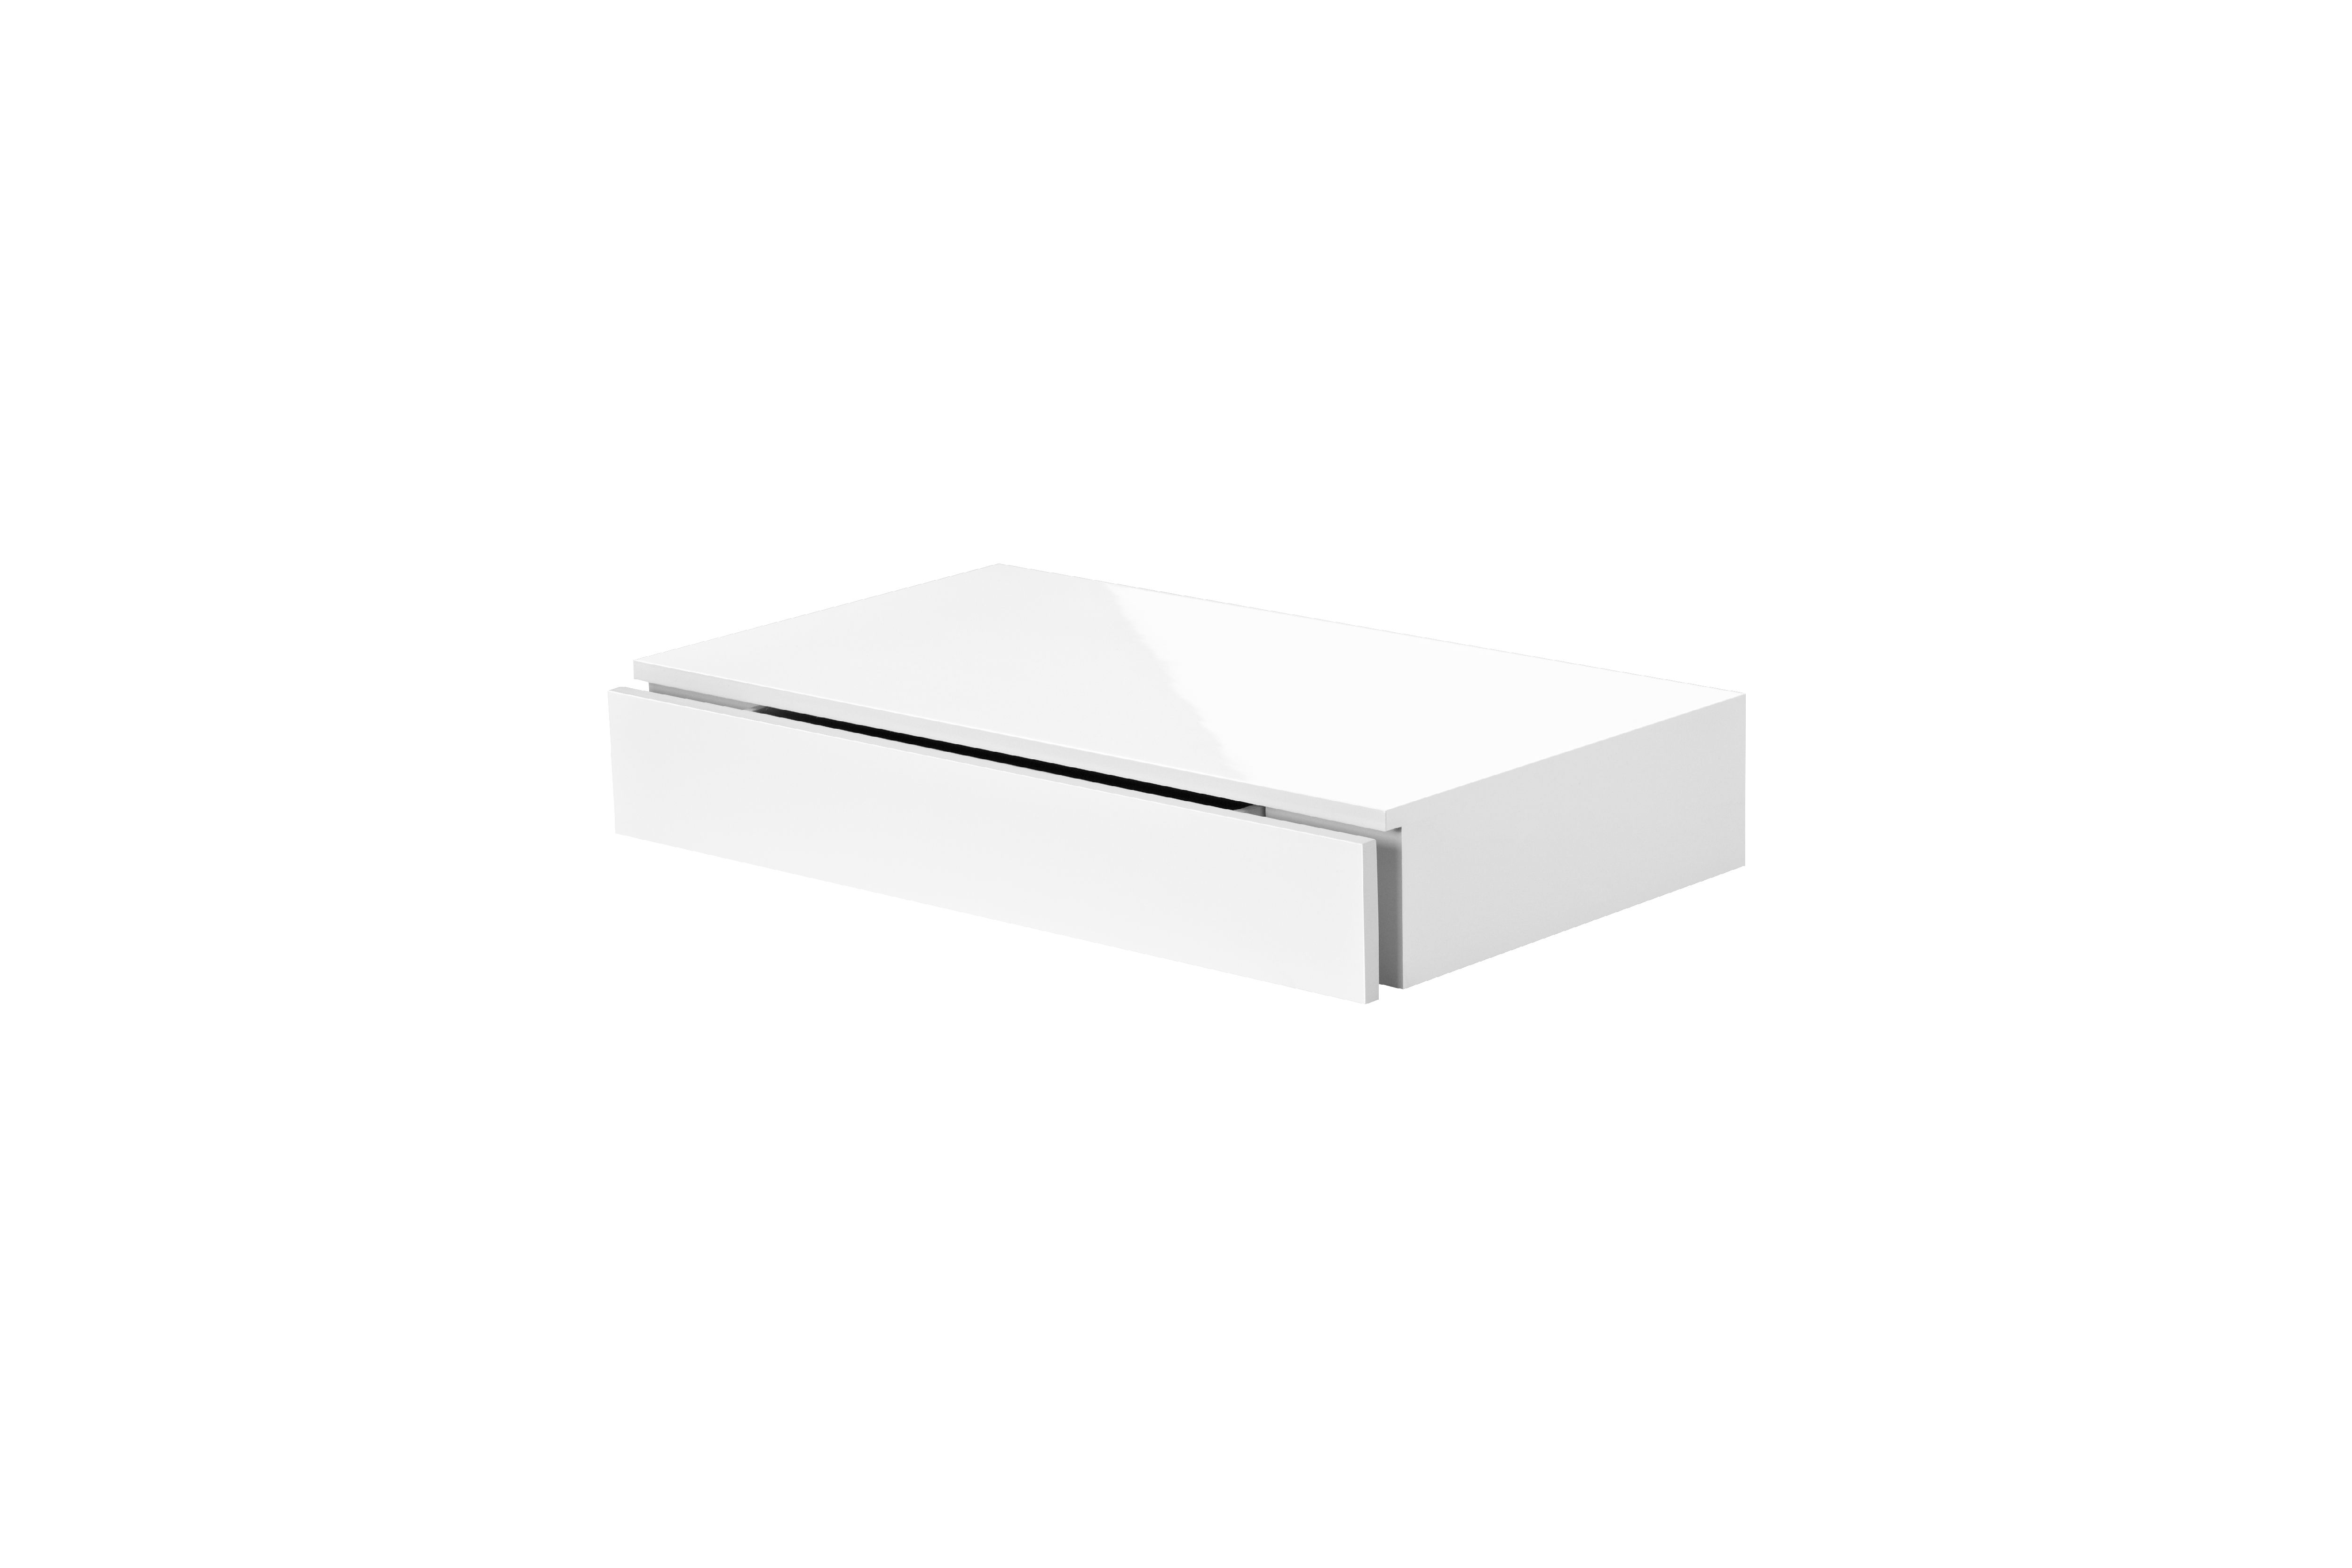 floating shelf with drawer the shelving cassetto high gloss white iphone plus lazada bookcase bath storage ideas wall rack wooden shaped corner shelves narrow video units ikea